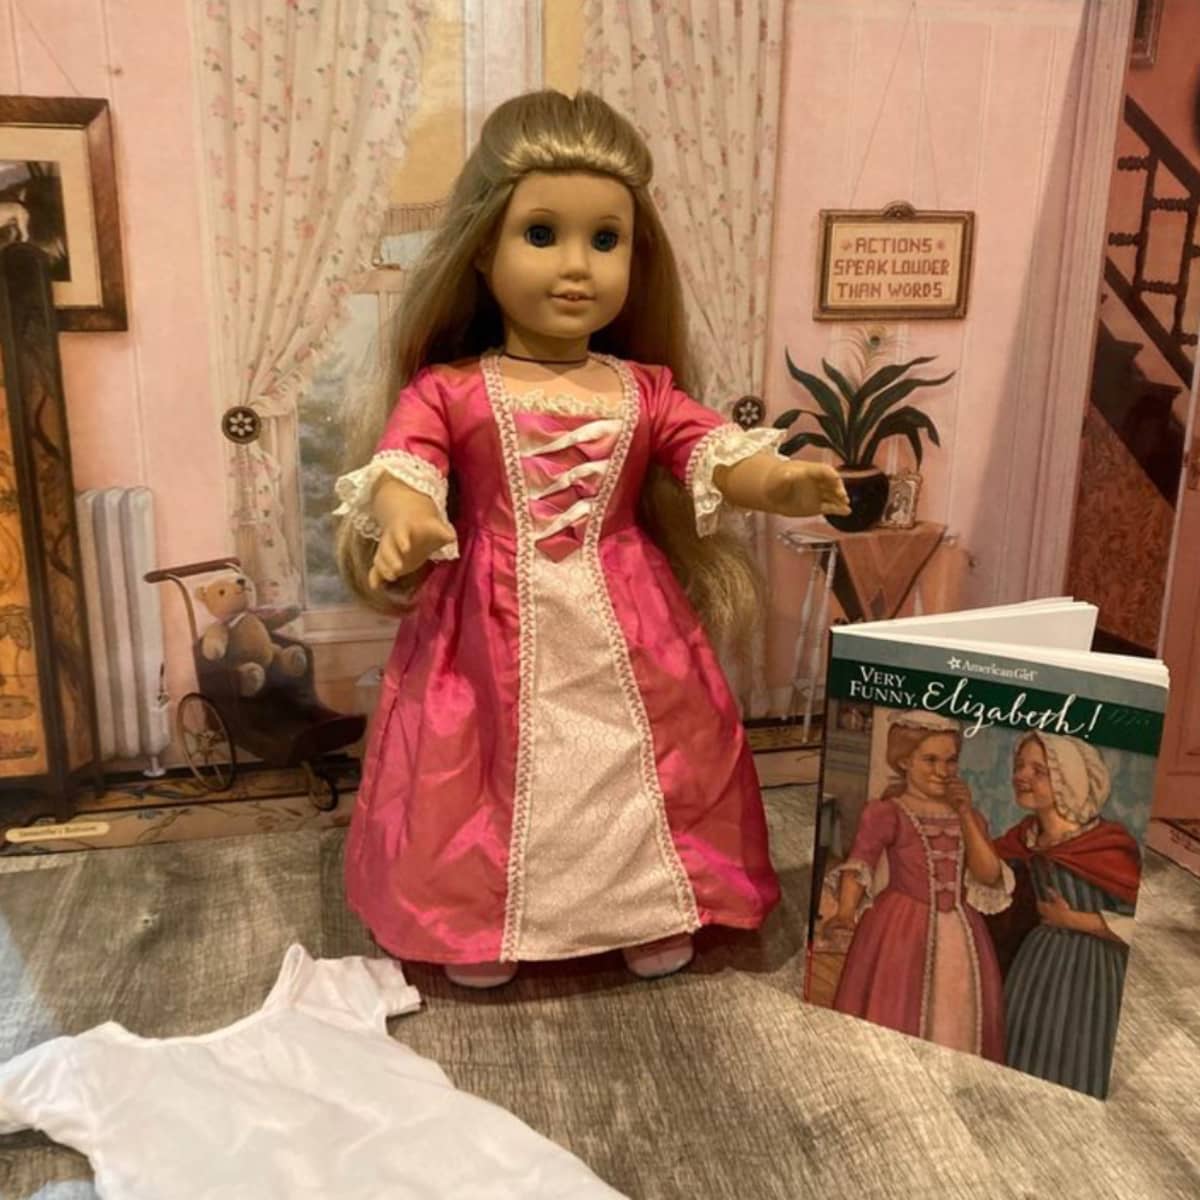 The 4 Best Places to Buy Retired American Girl Products Online